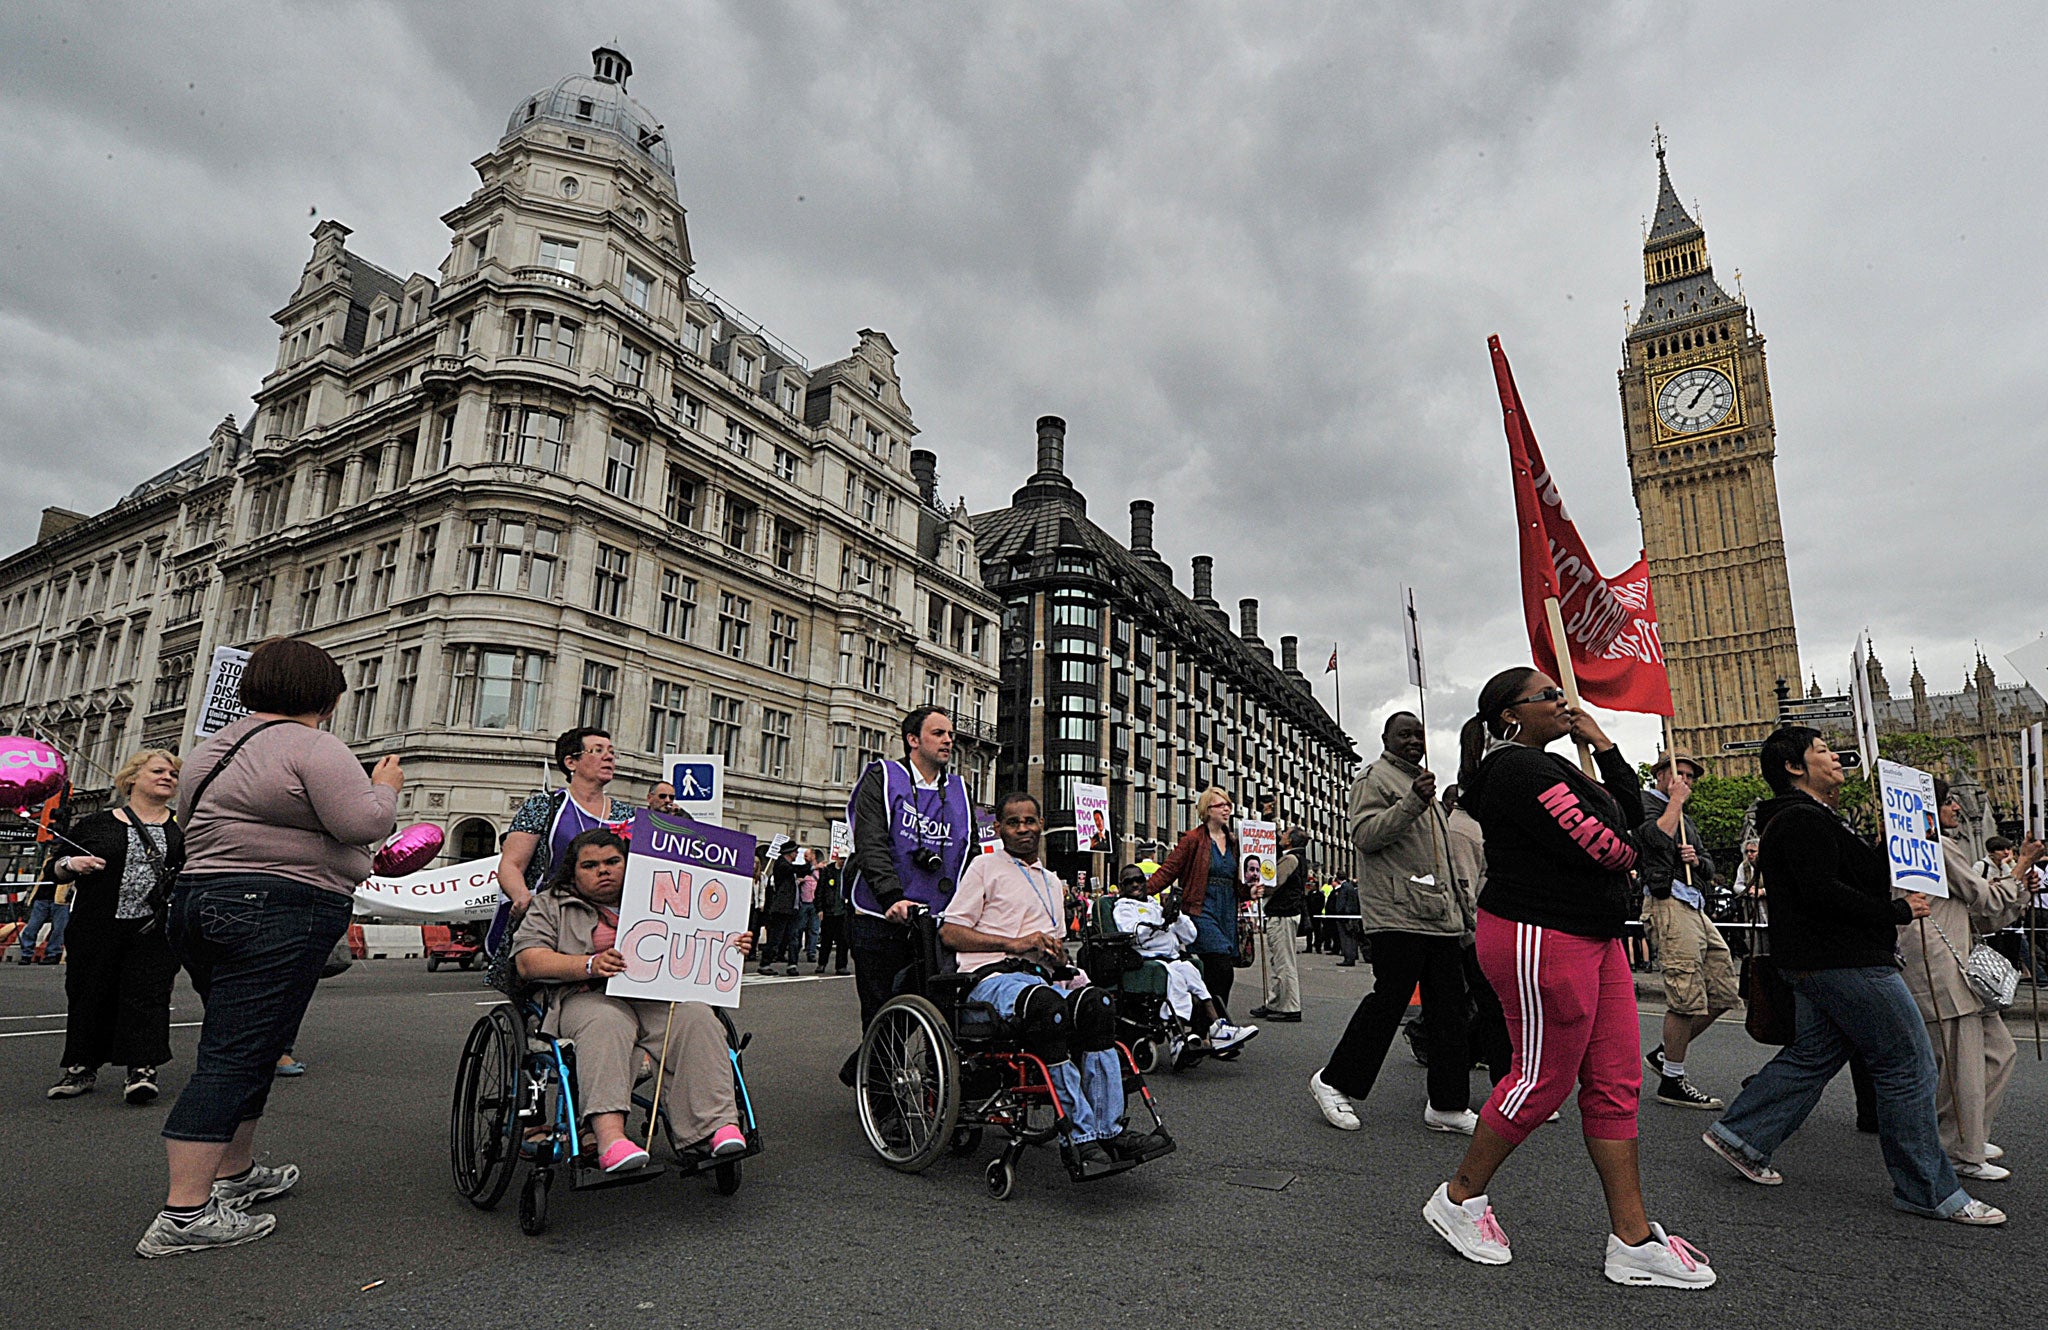 Protests in London over changes to disability benefits in 2013